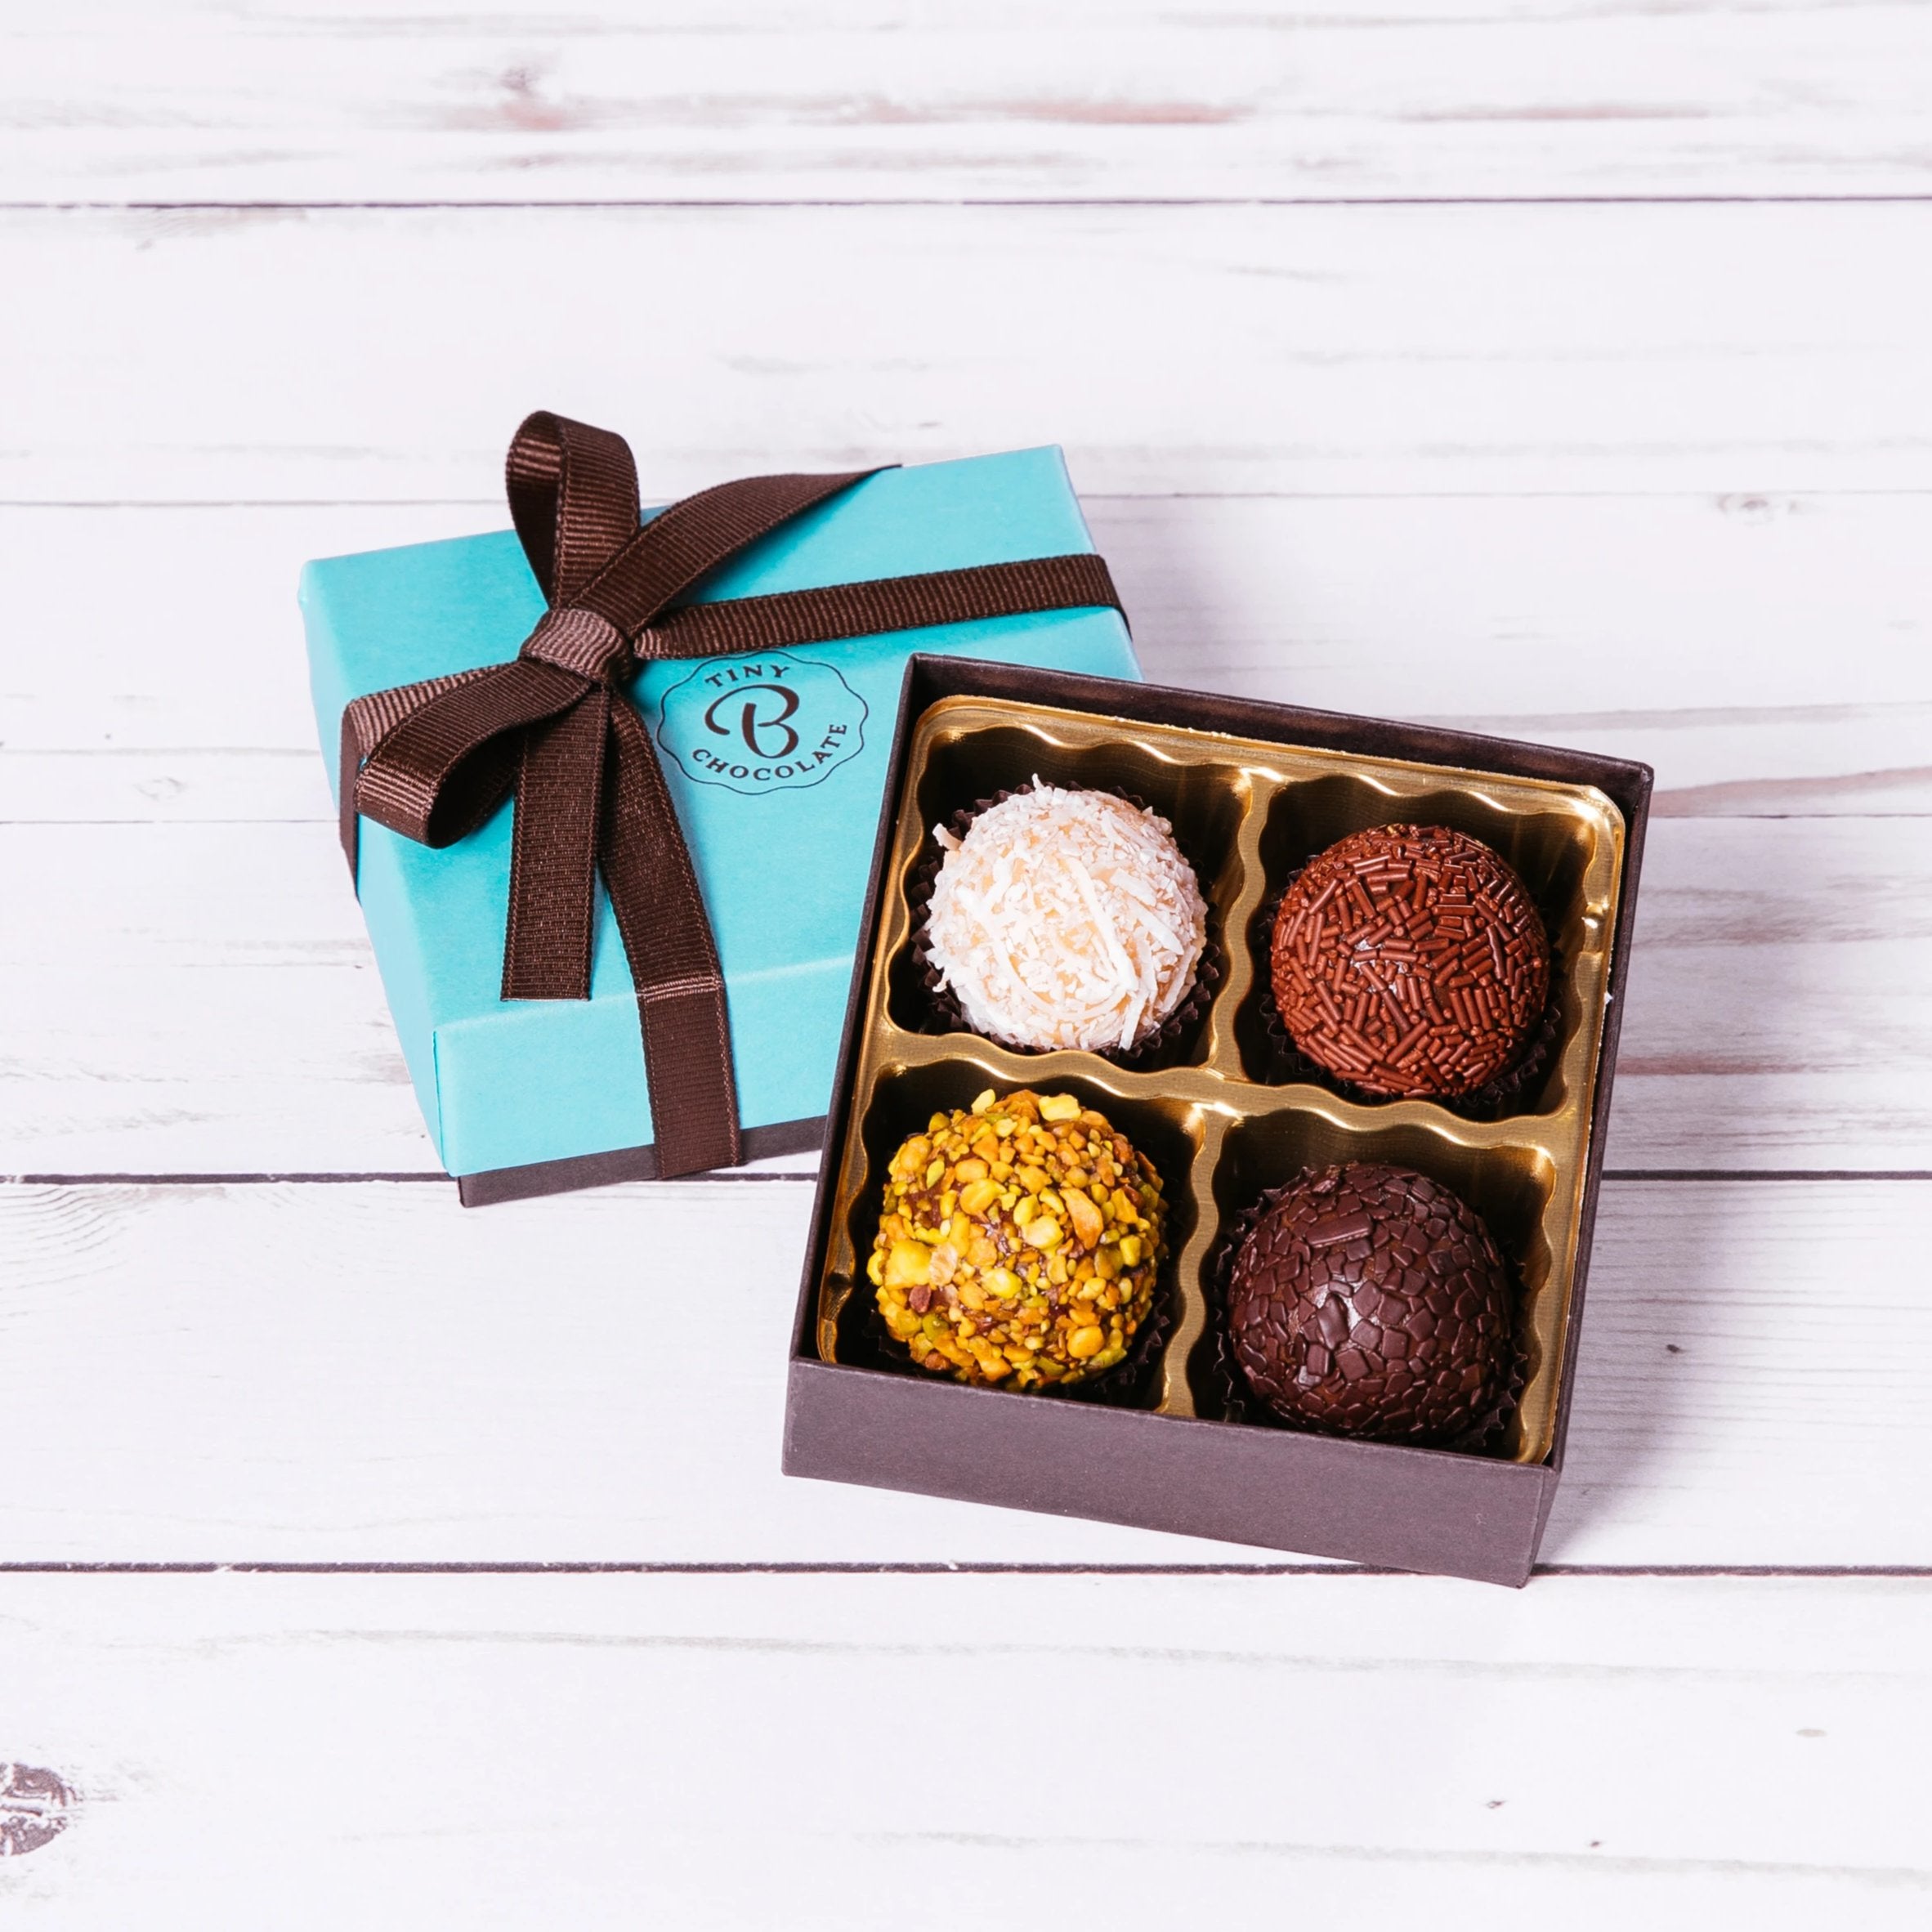 Brigadeiros with 4 different flavors